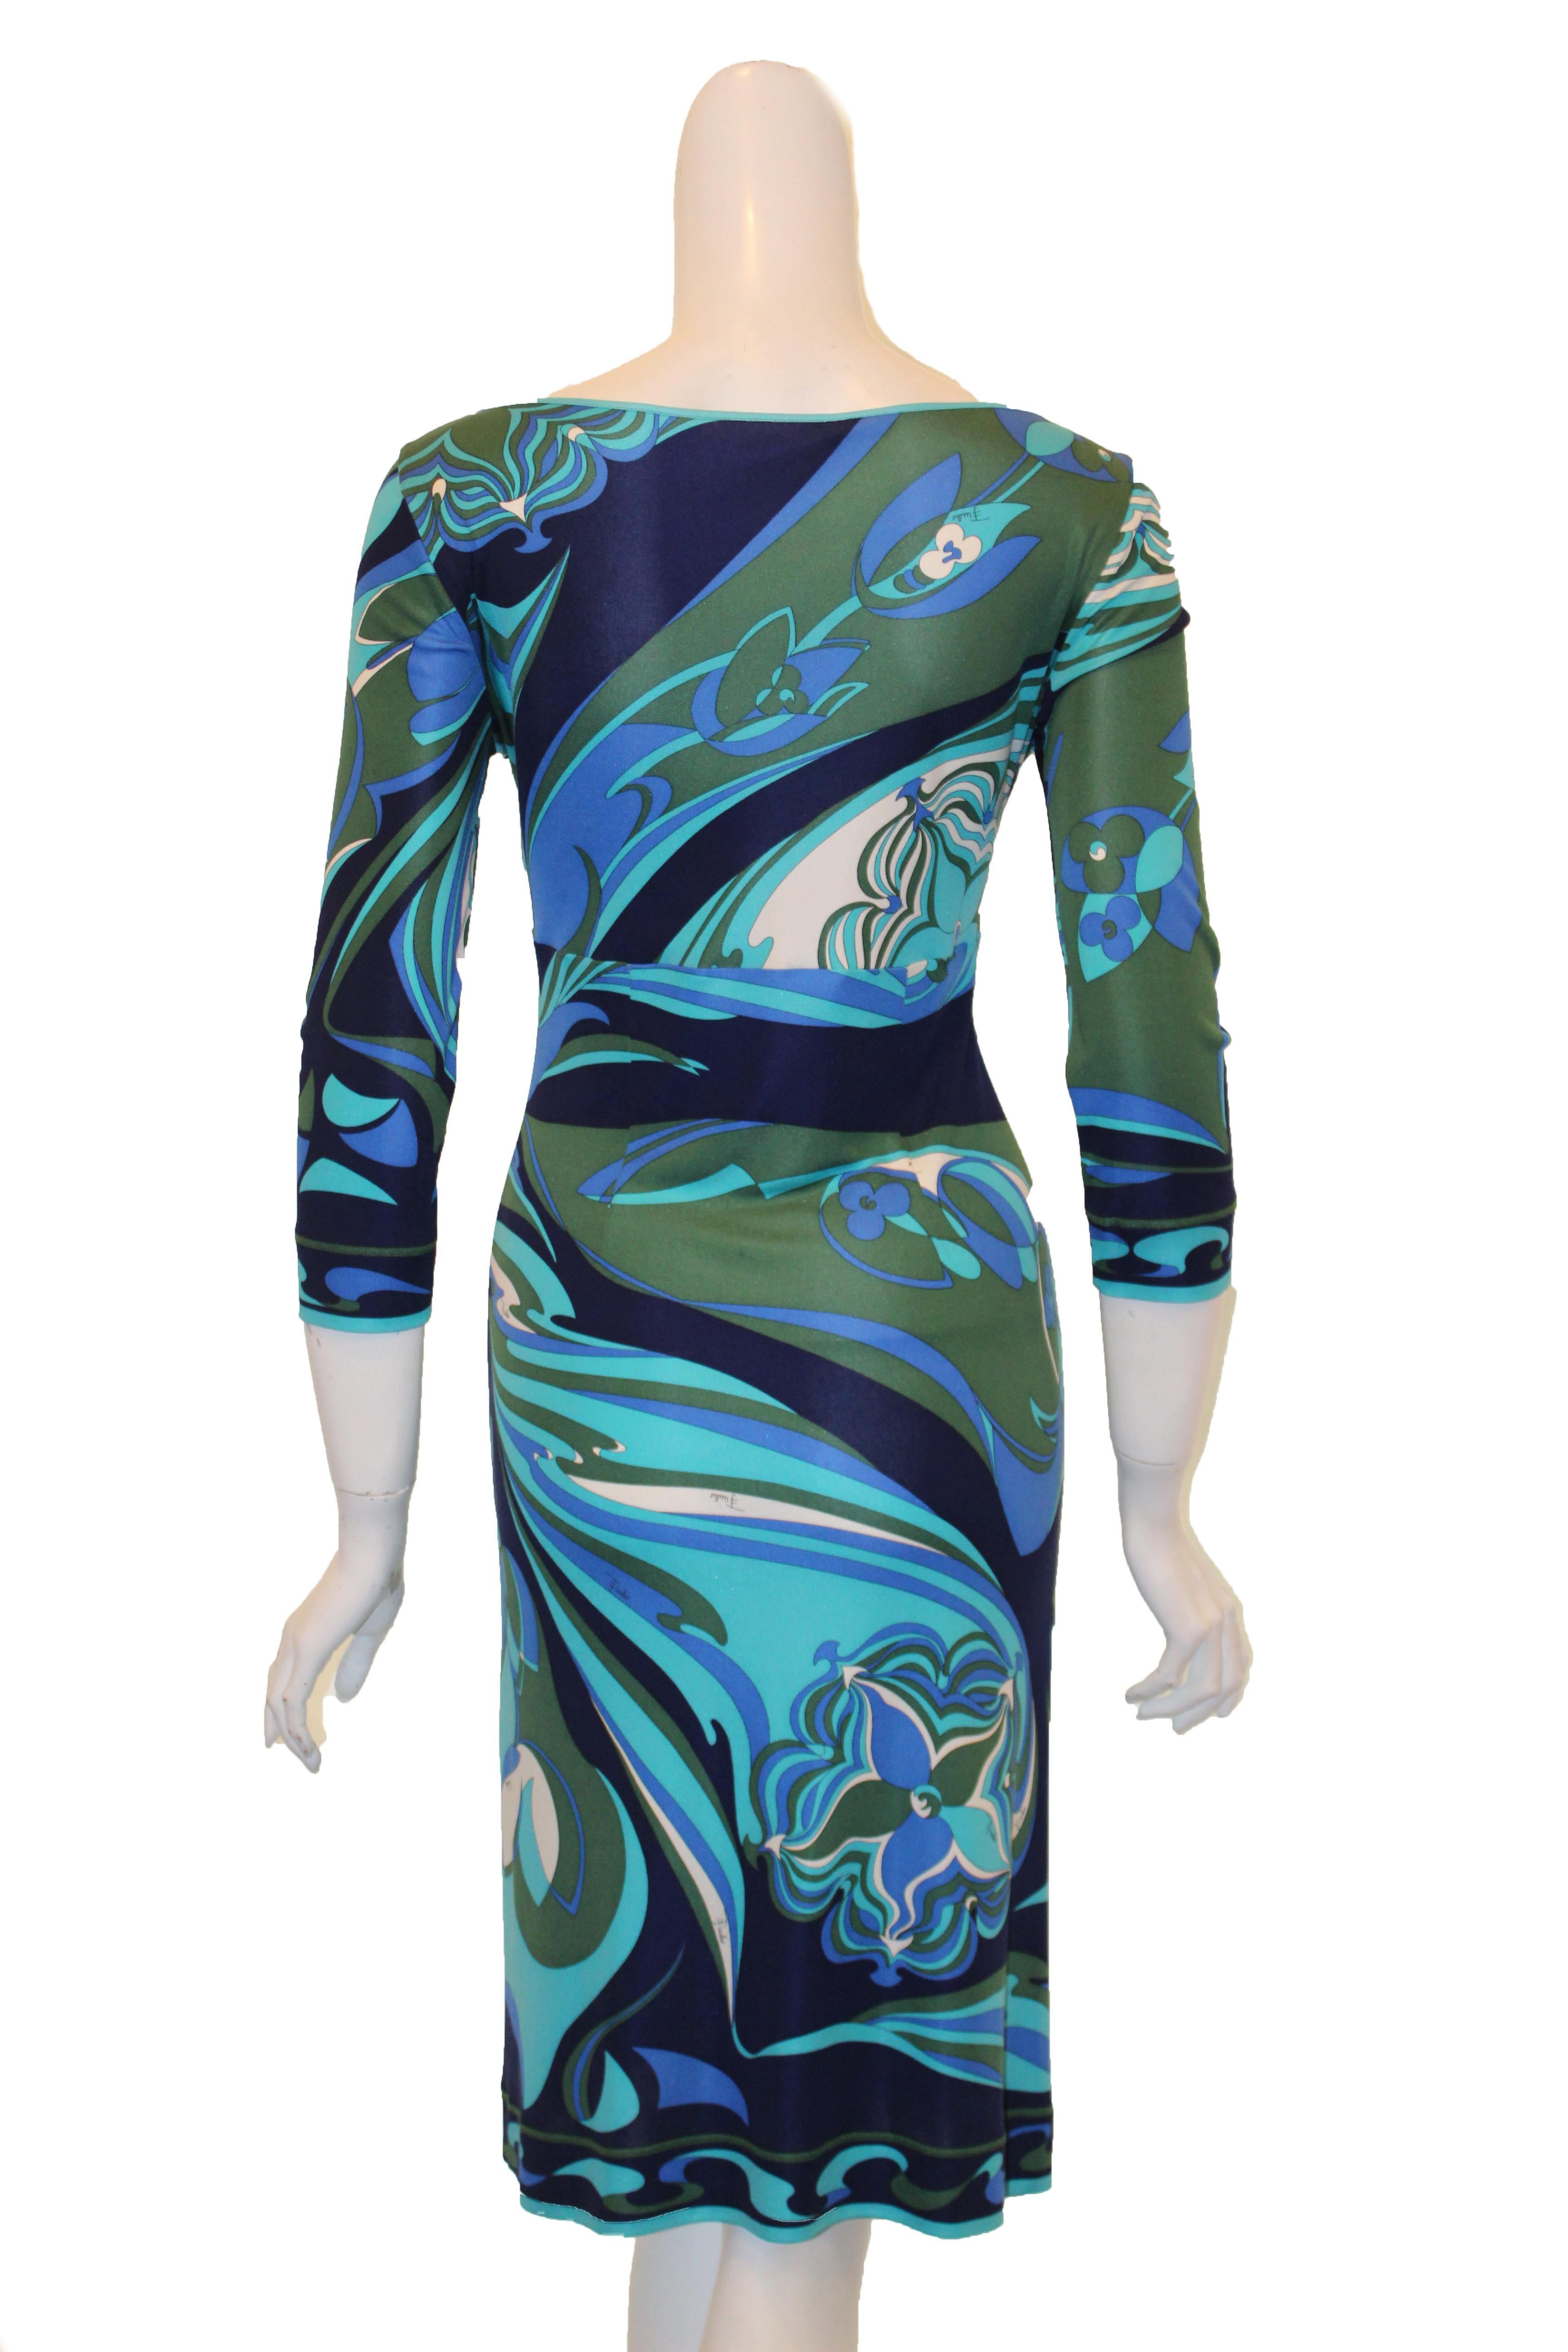 Emilio Pucci Blue, Turquoise & Green Peek a Boo Front Closure Dress  In Excellent Condition For Sale In Palm Beach, FL